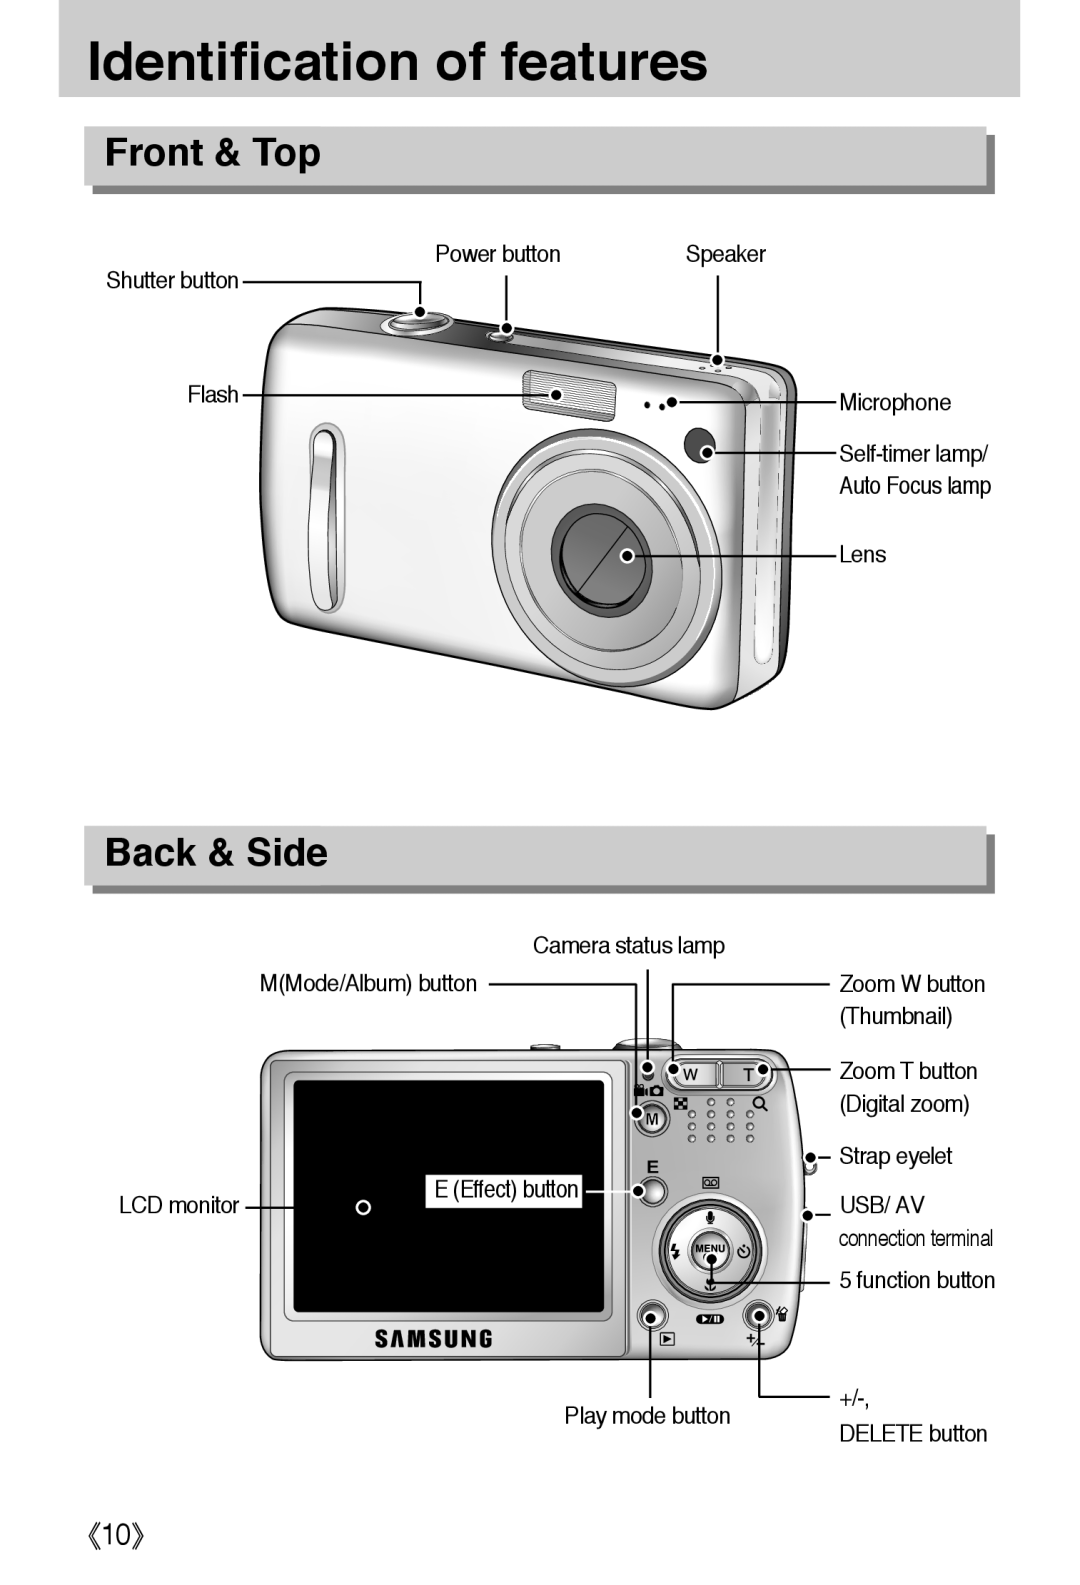 Samsung L50 user manual Identification of features, Front & Top, Back & Side, 《10》 